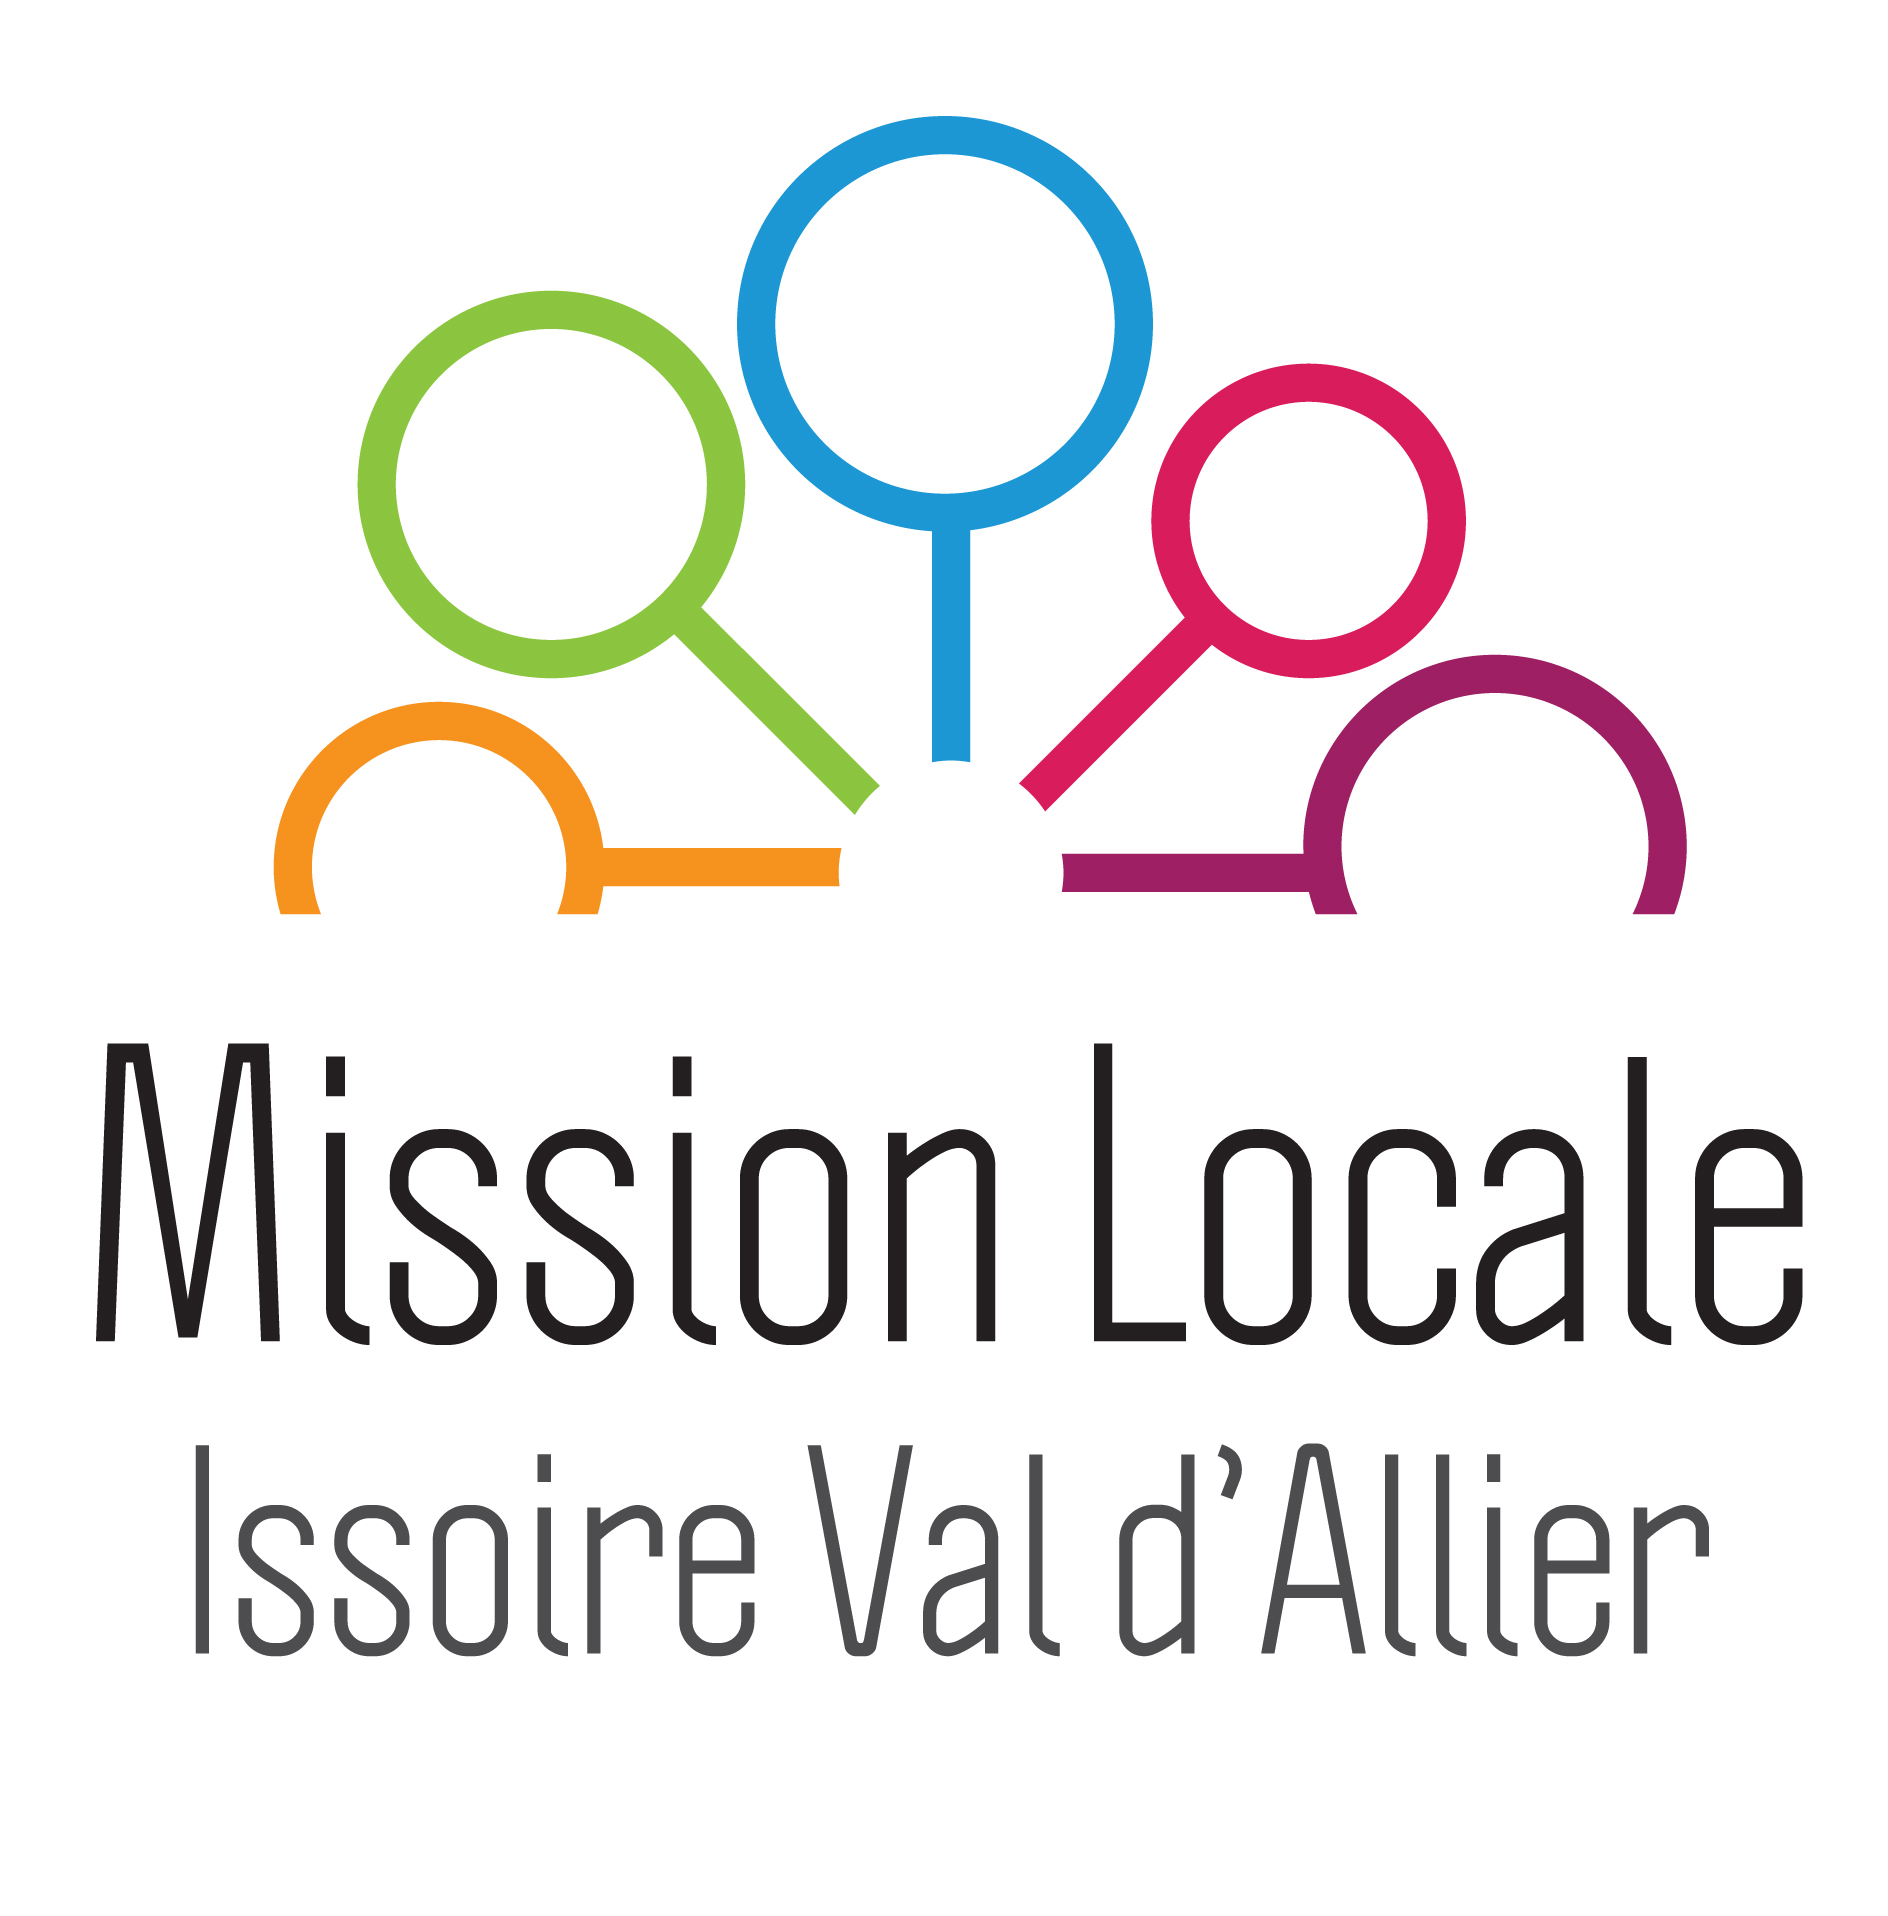 Mission Locale Issoire Val d'Allier